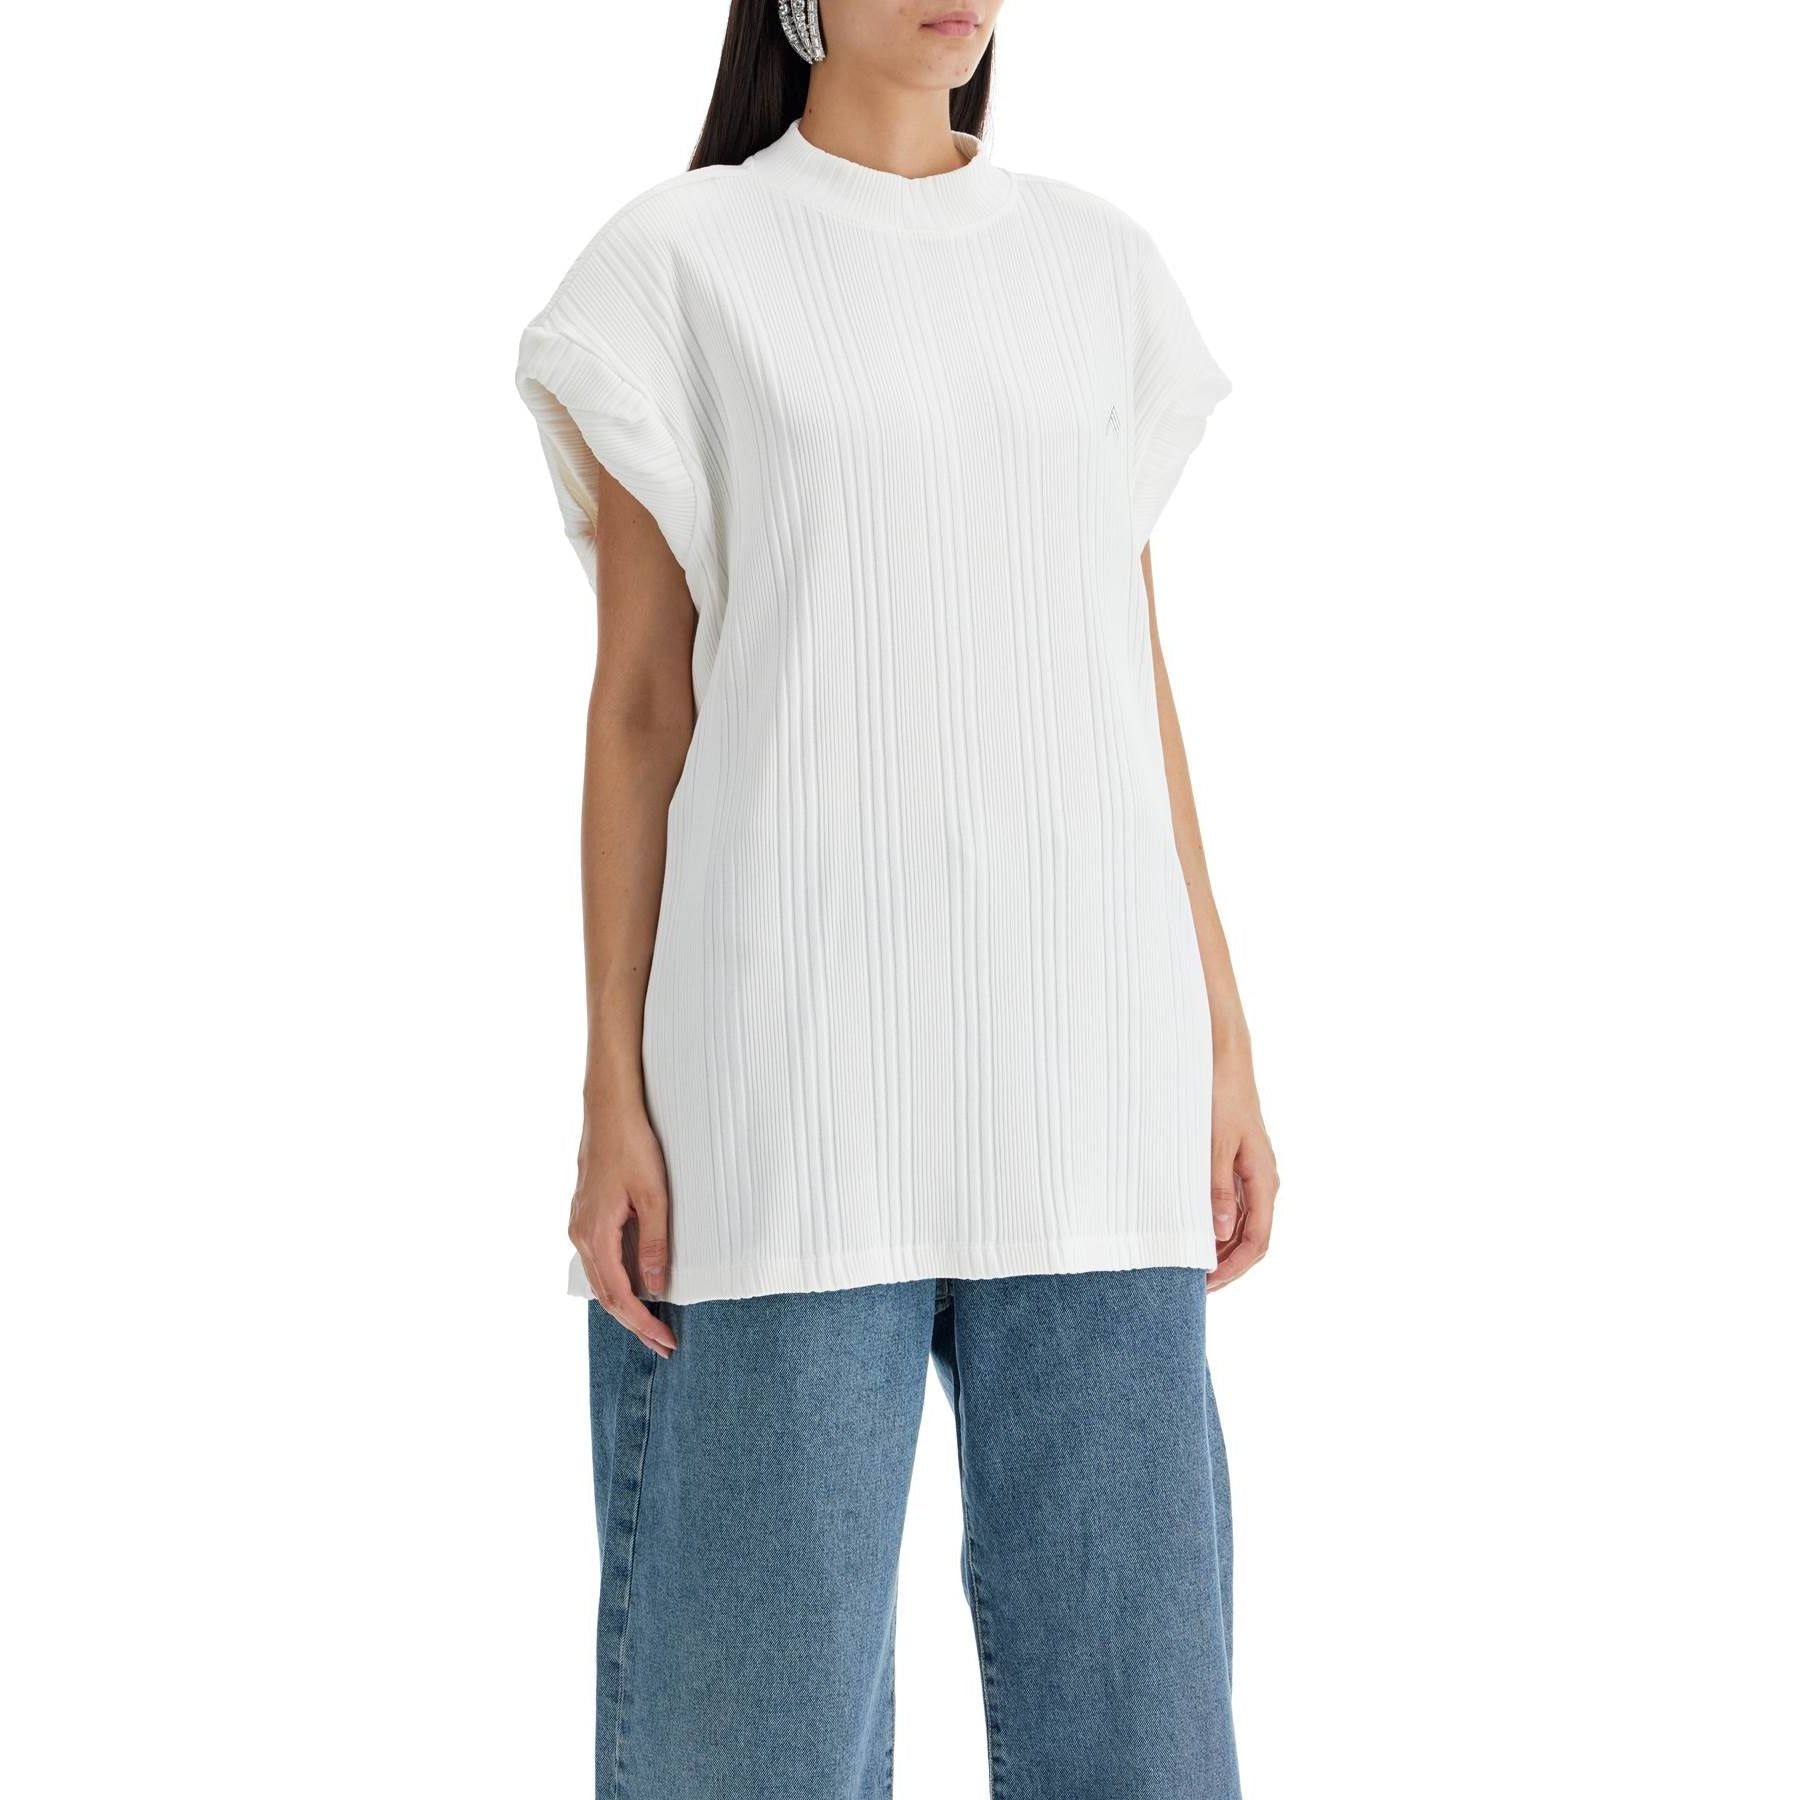 Laurie Shoulder Padded T-Shirt